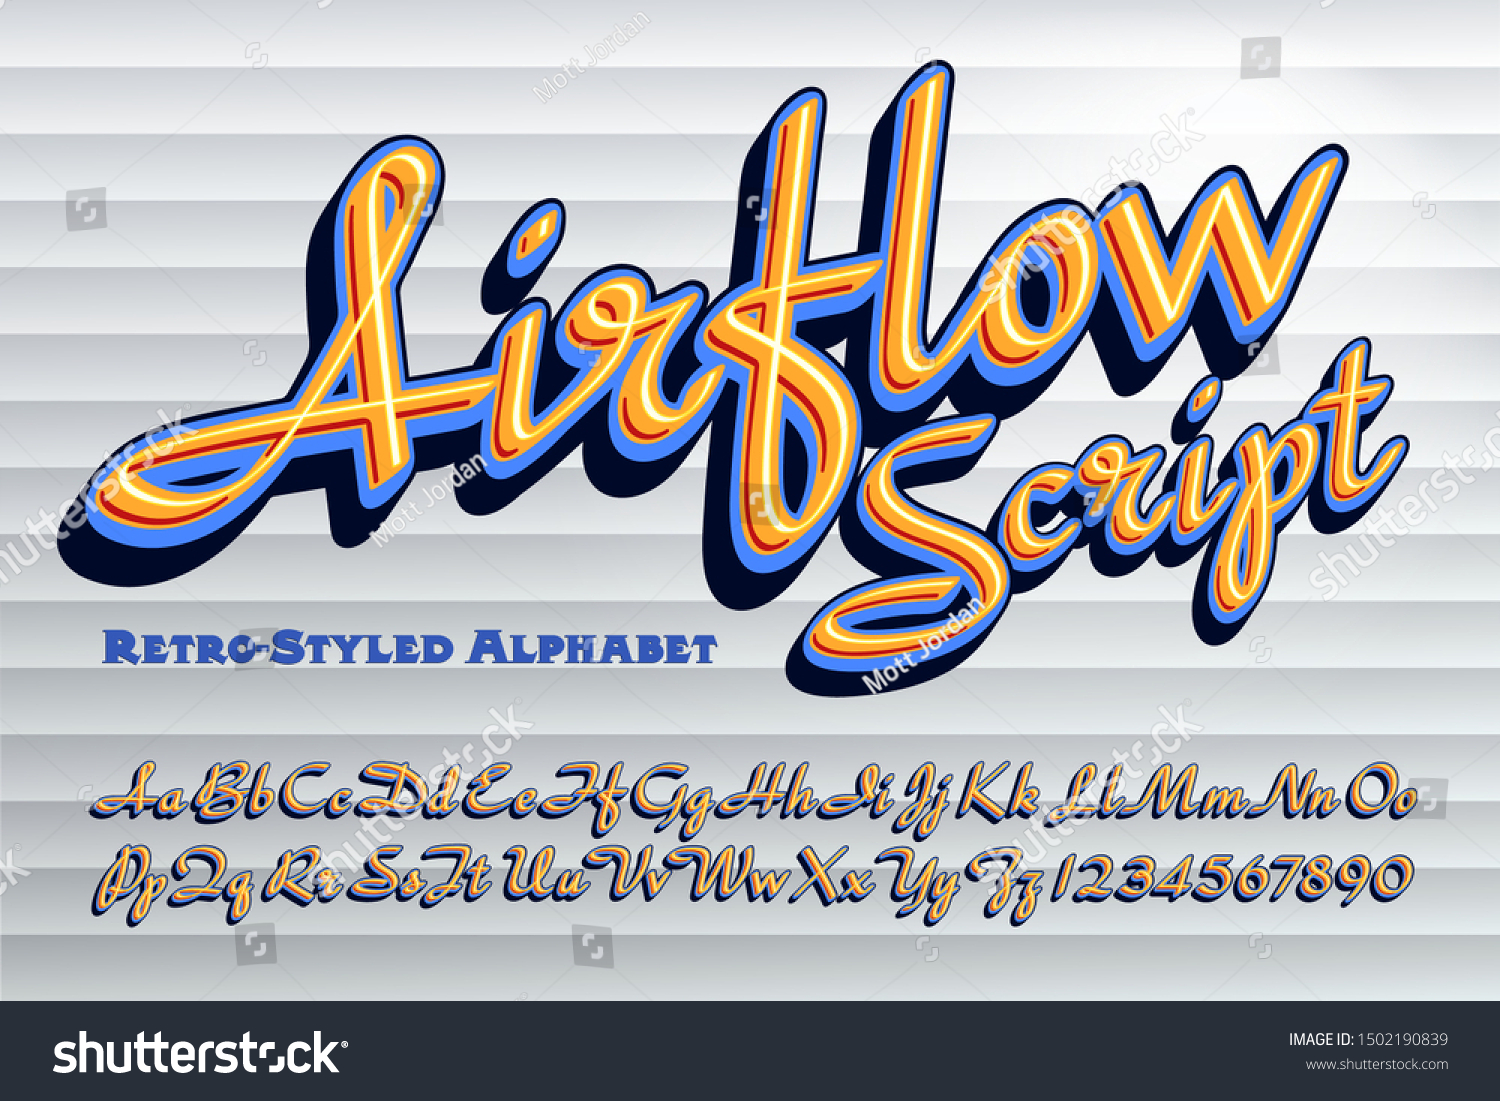 SVG of A retro styled vintage script alphabet. This lettering is influenced by 1940s and 1950s script fonts. svg